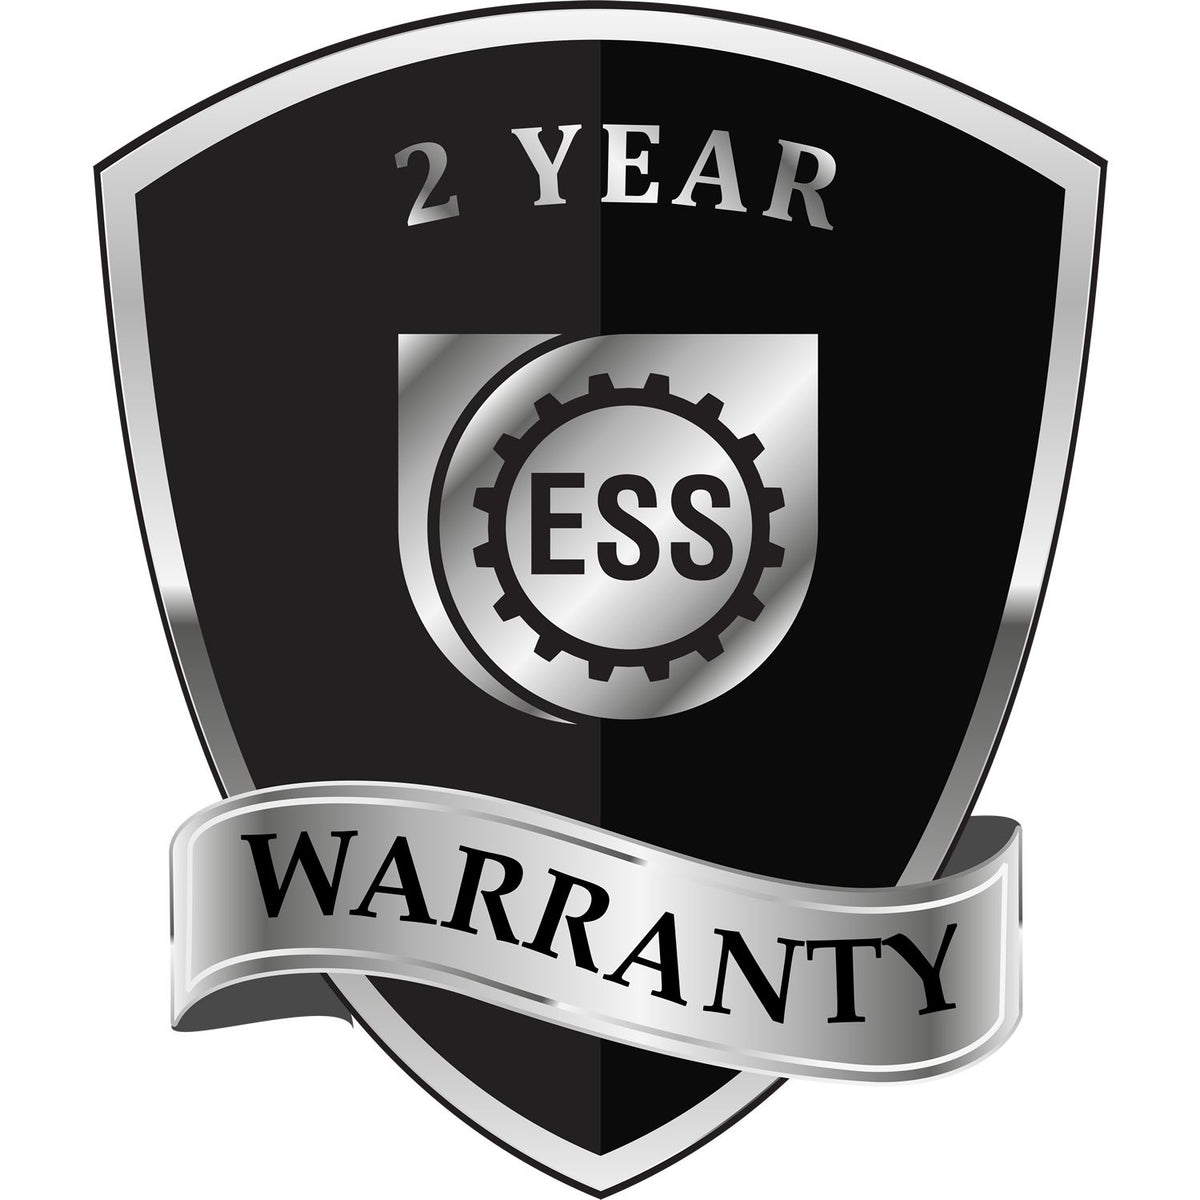 A black and silver badge or emblem showing warranty information for the Soft Delaware Professional Geologist Seal